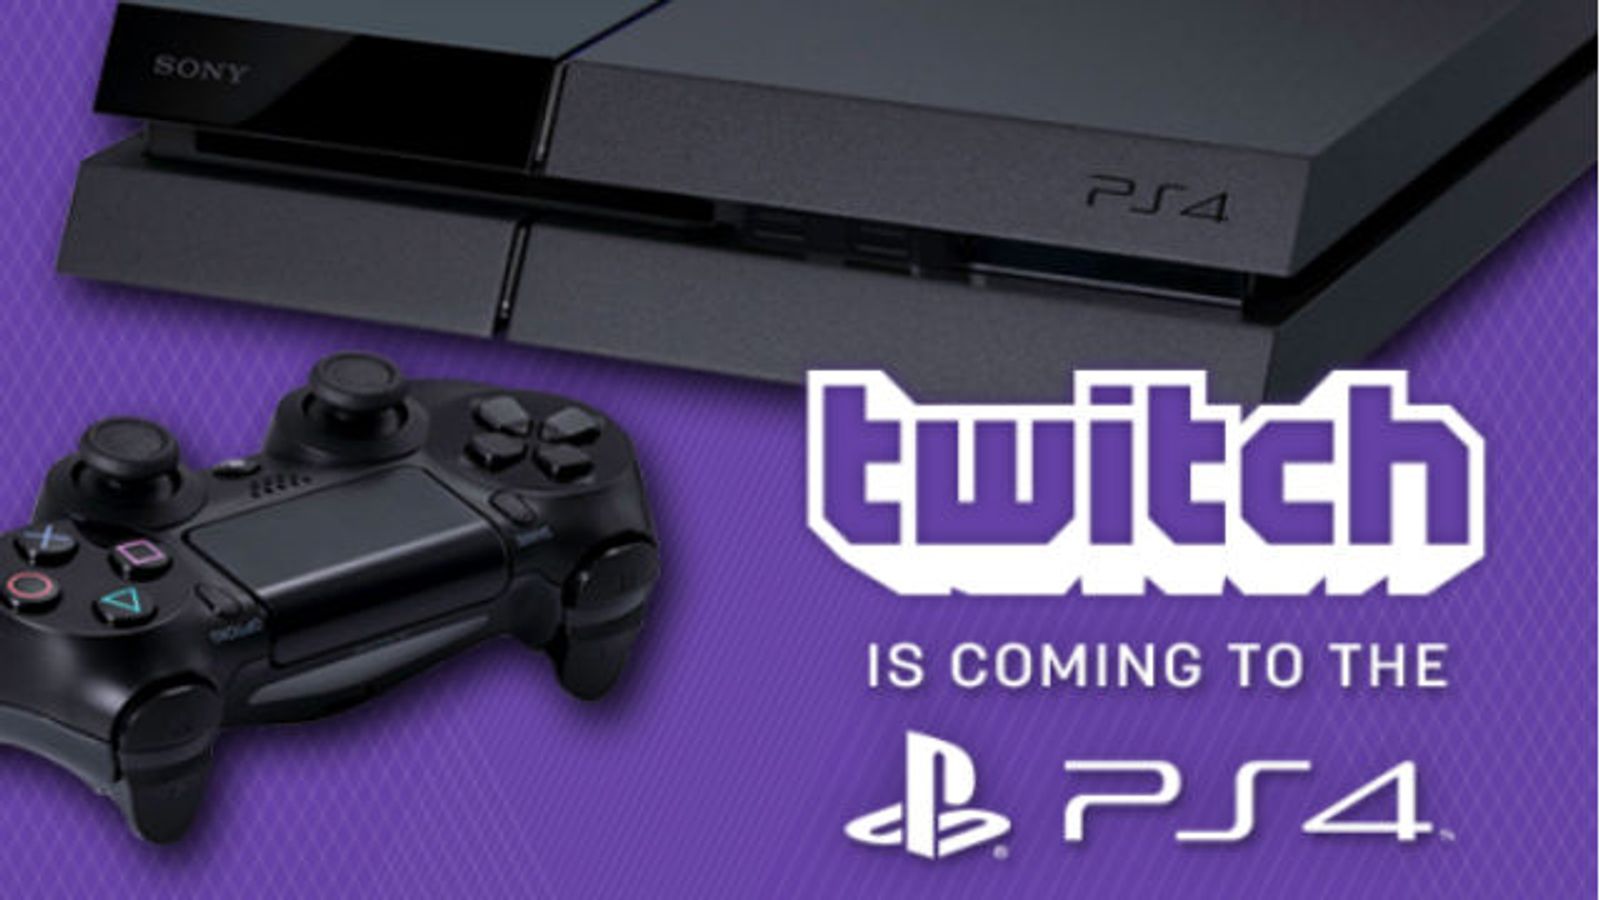 Some PS4 Users Live Streaming More Than Just Game Play